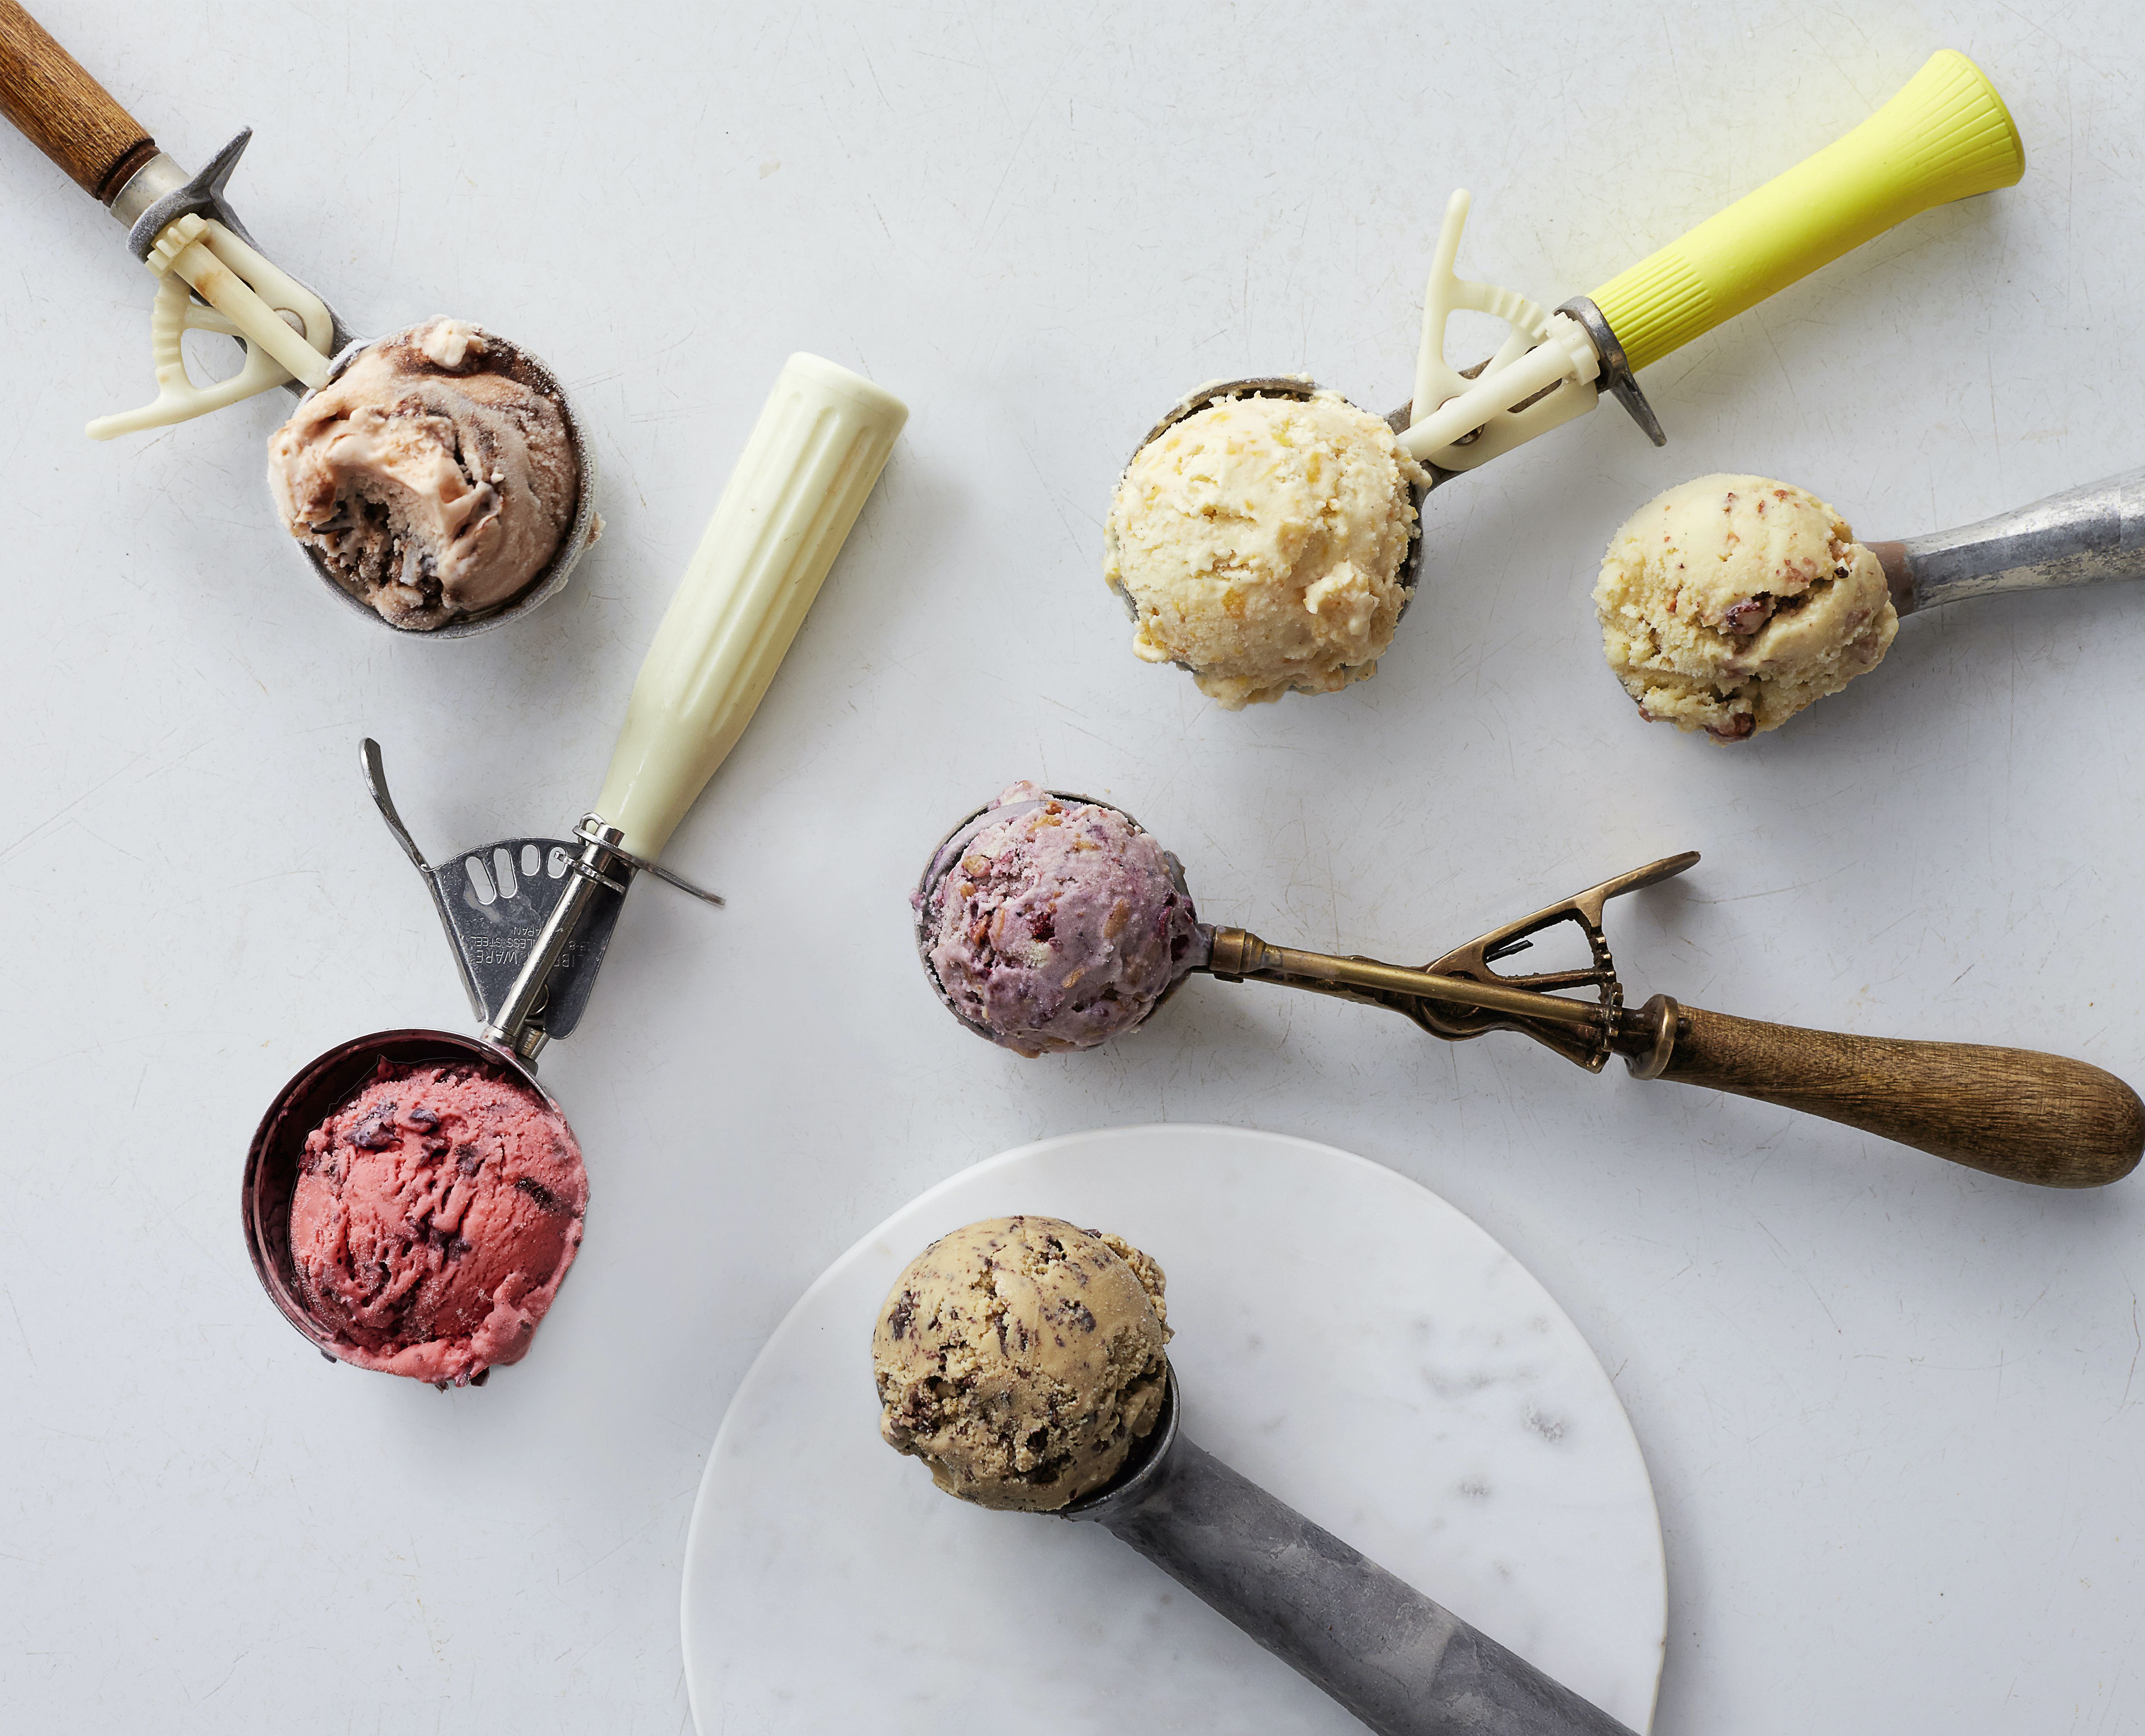 19 Best Ice Cream Products and Tools - How to Make Homemade Ice Cream